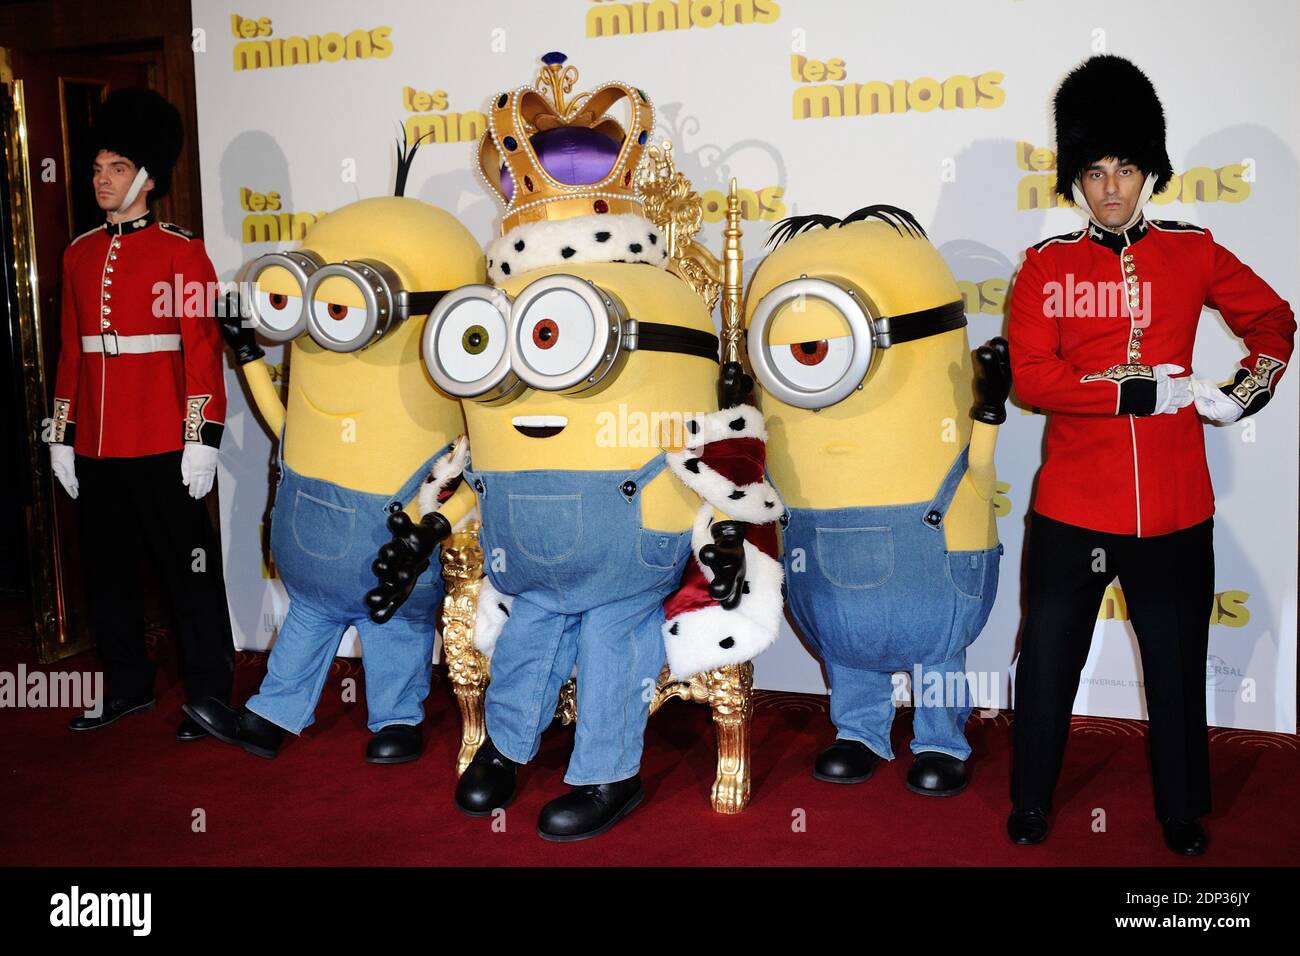 The Minions (Stuart, Kevin and Bob) attending the premiere for the film  Minions (Les Minions) at